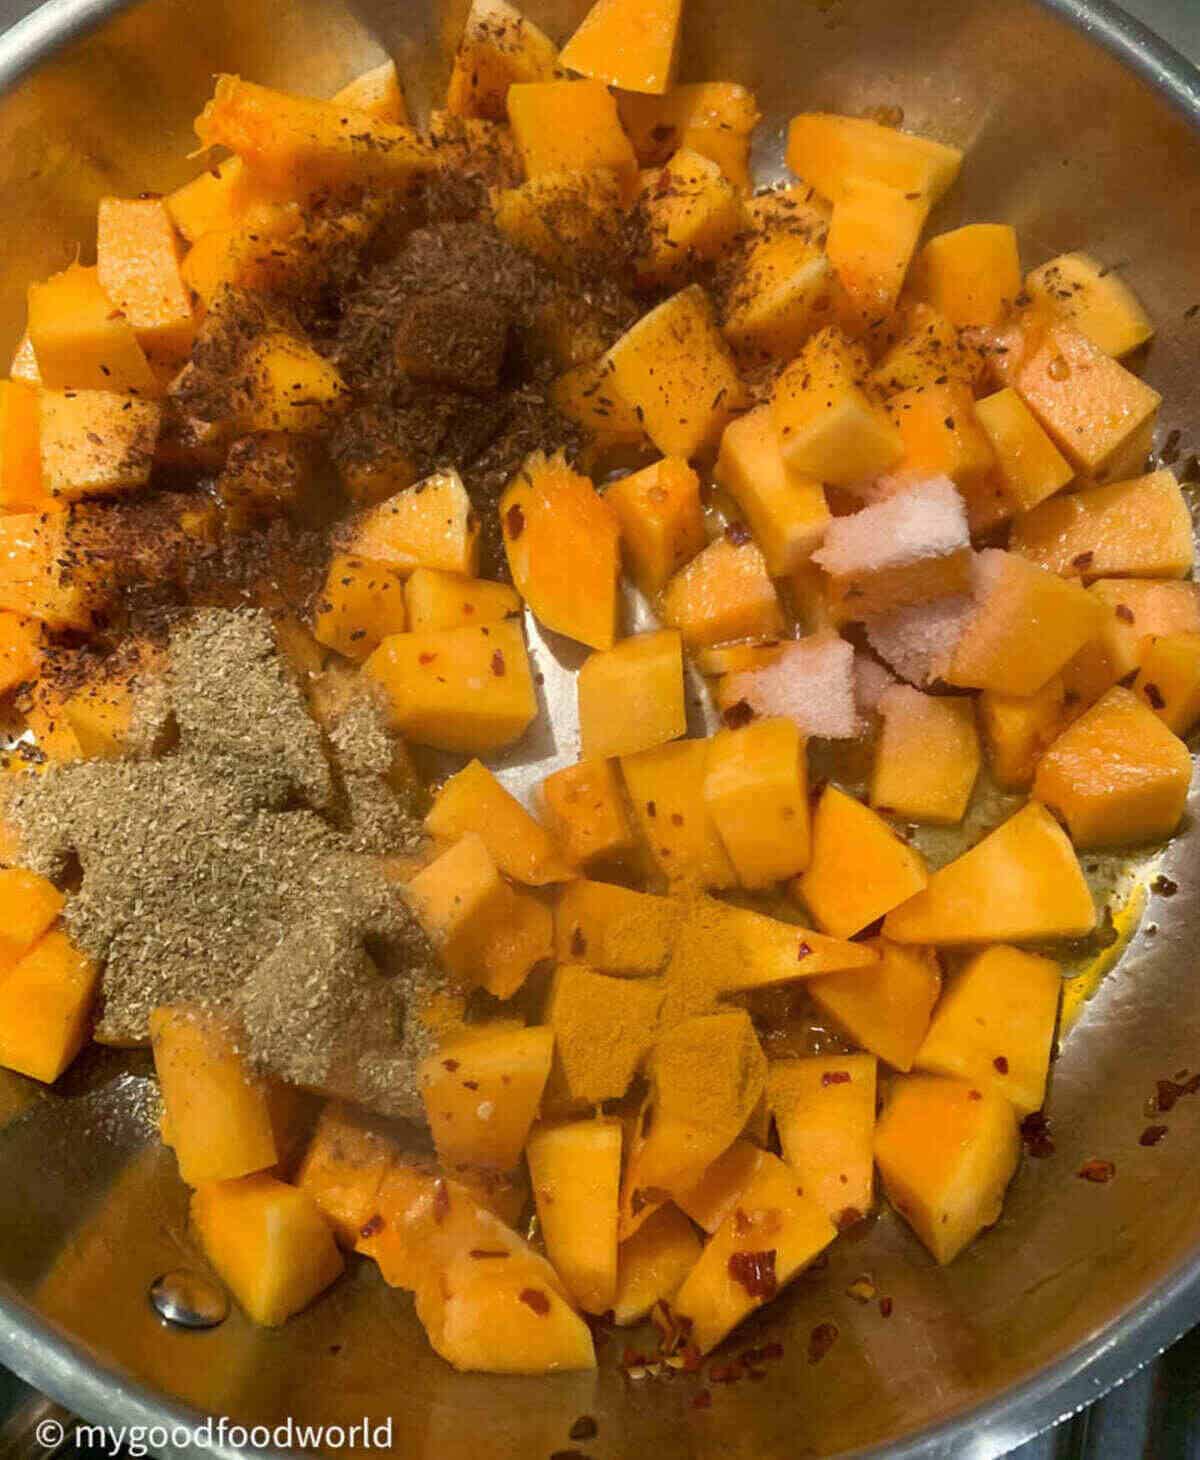 Spices on butternut squash cubes that are sautéing in a pan.